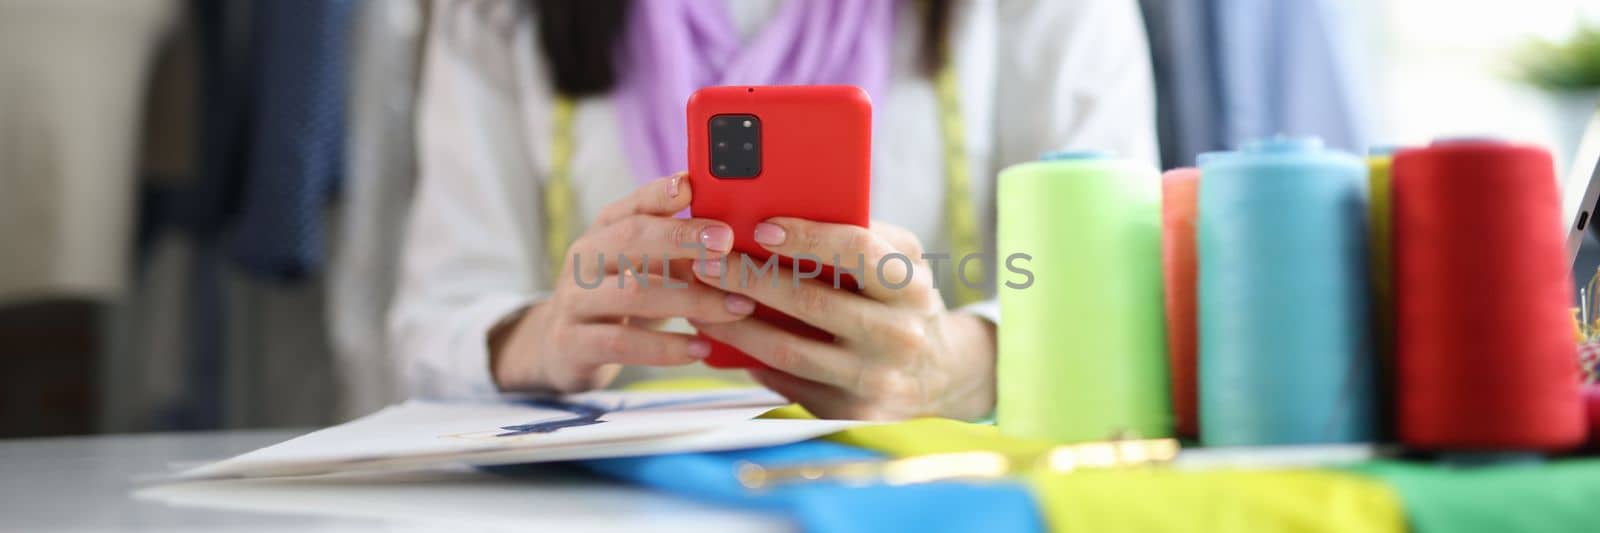 Beautiful fashion designer is sitting at table and typing on smartphone by kuprevich